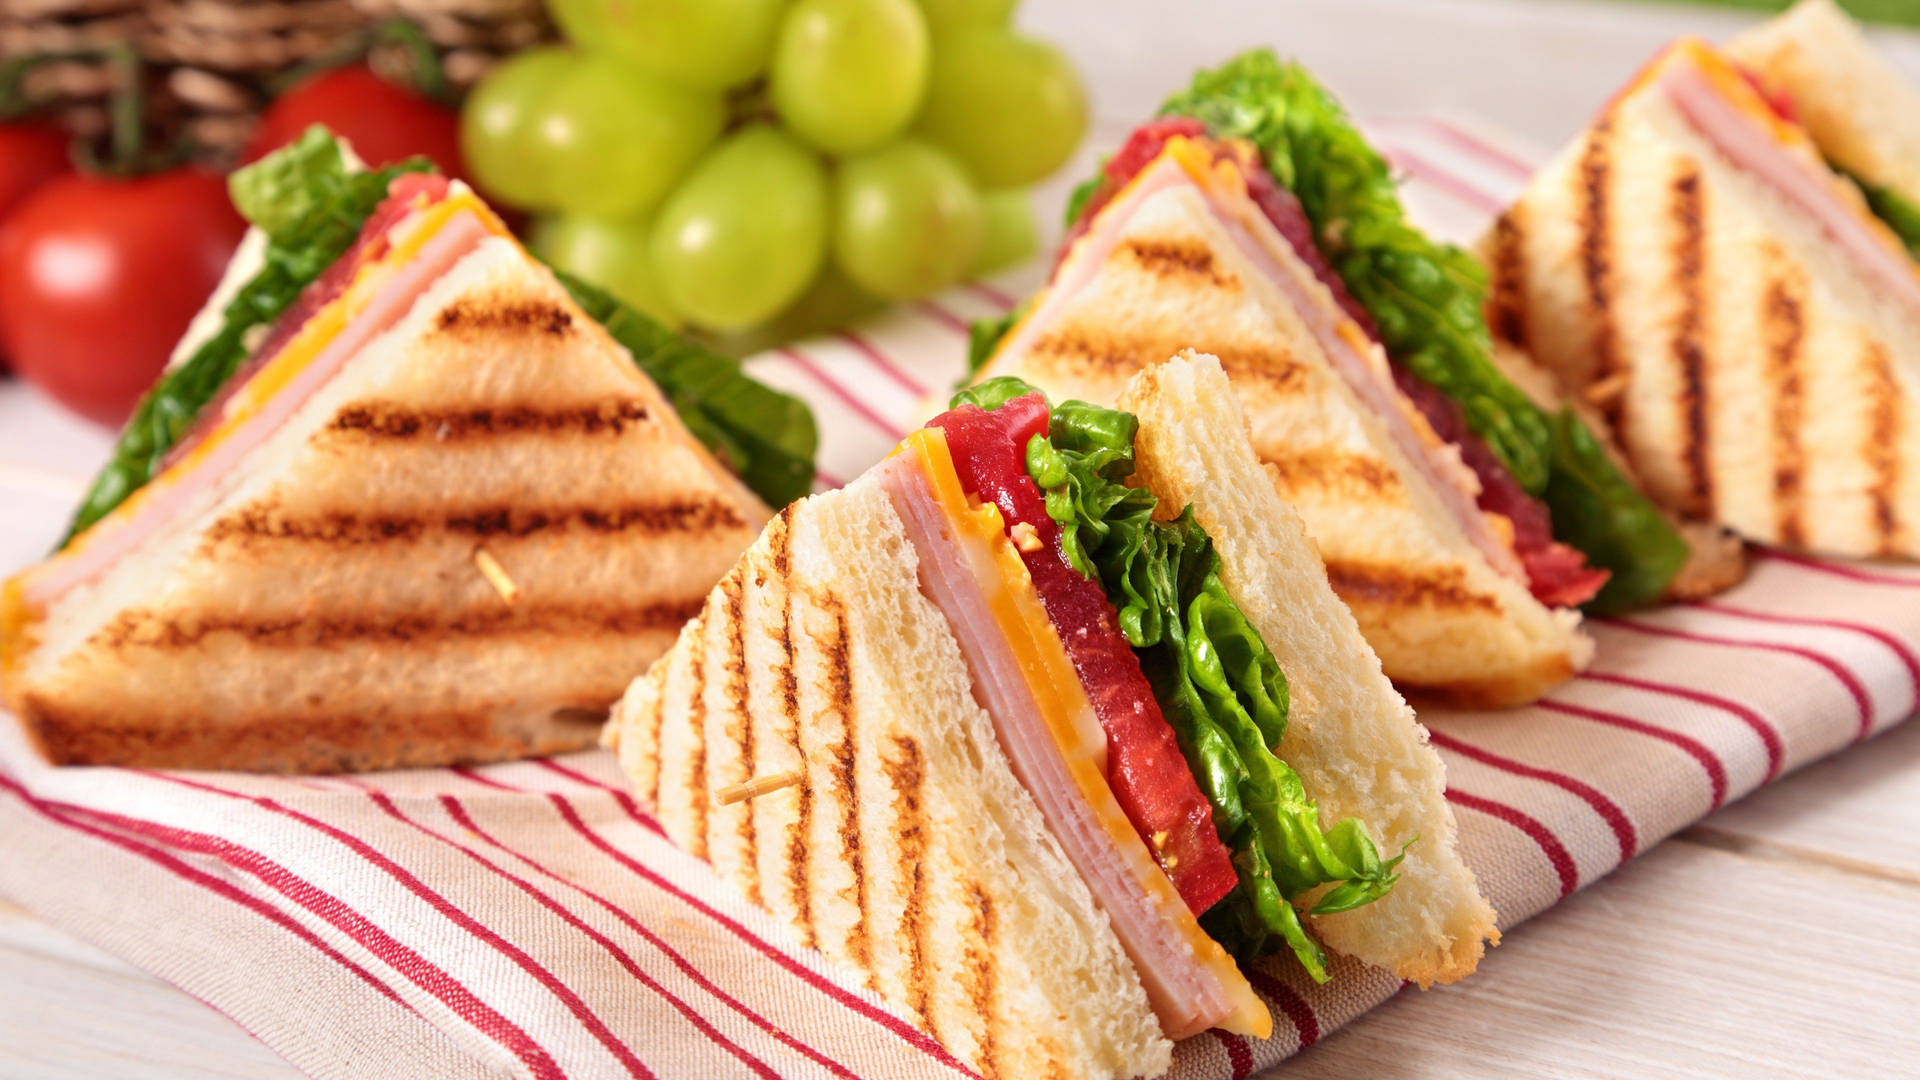 "Art of Delicious Grilled Club Sandwiches in Food Photography" Wallpaper